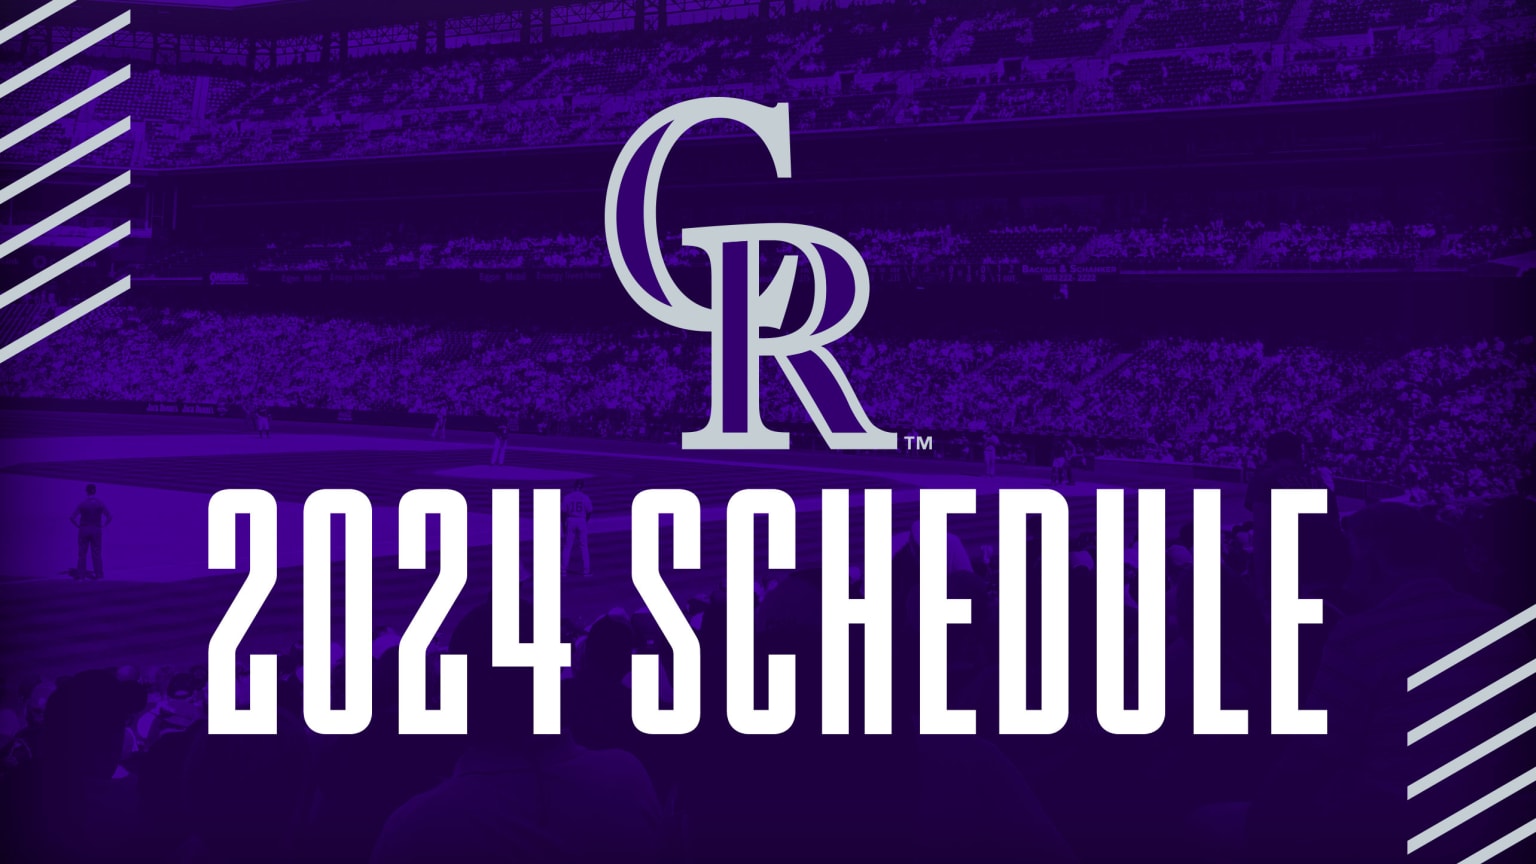 Rockies hold lottery for opening day Rockpile tickets